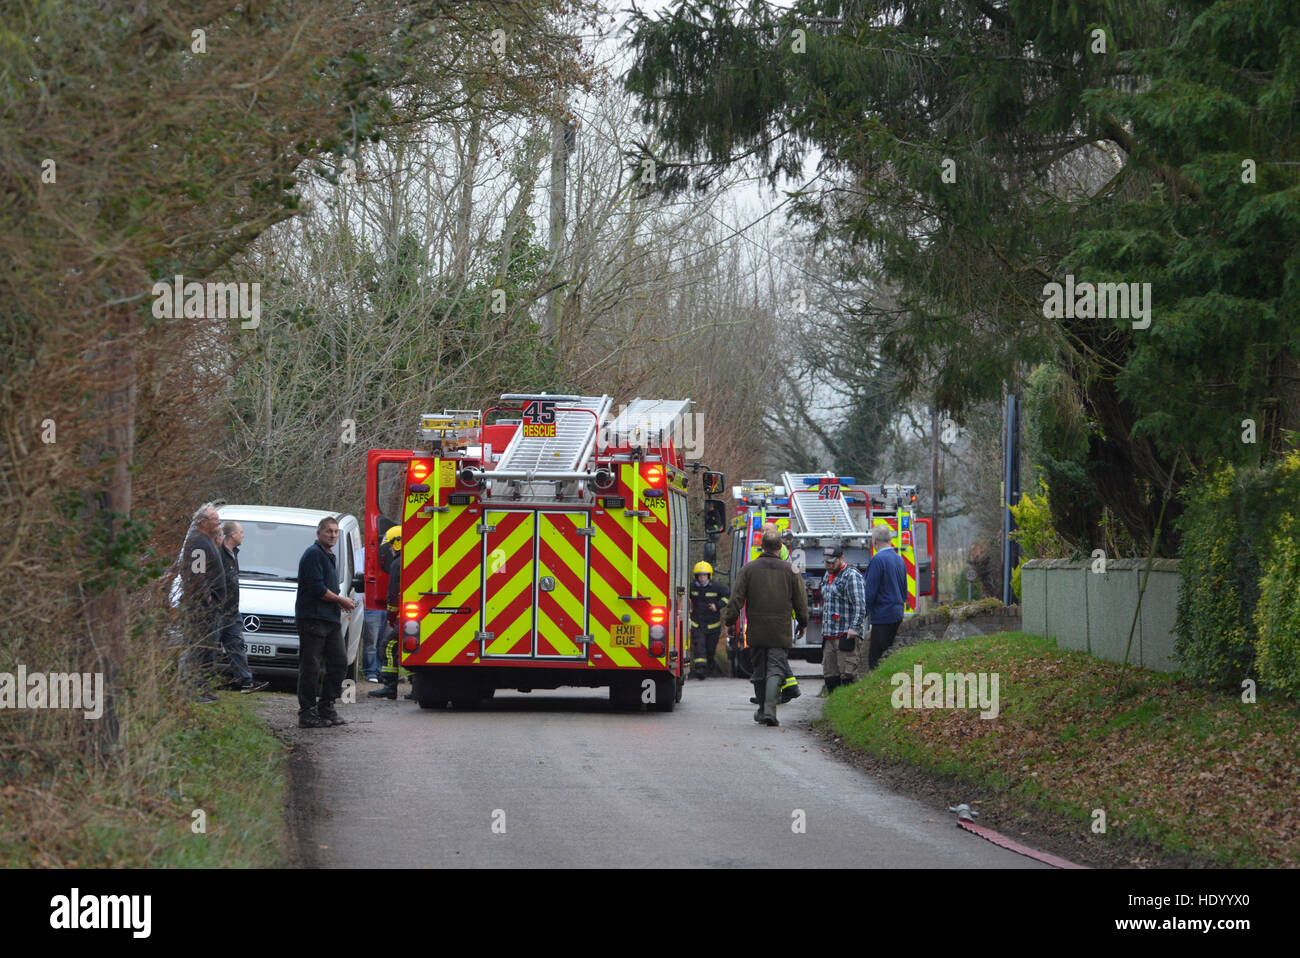 Fire brigade attending a fire at a rural property on a country lane. Stock Photo